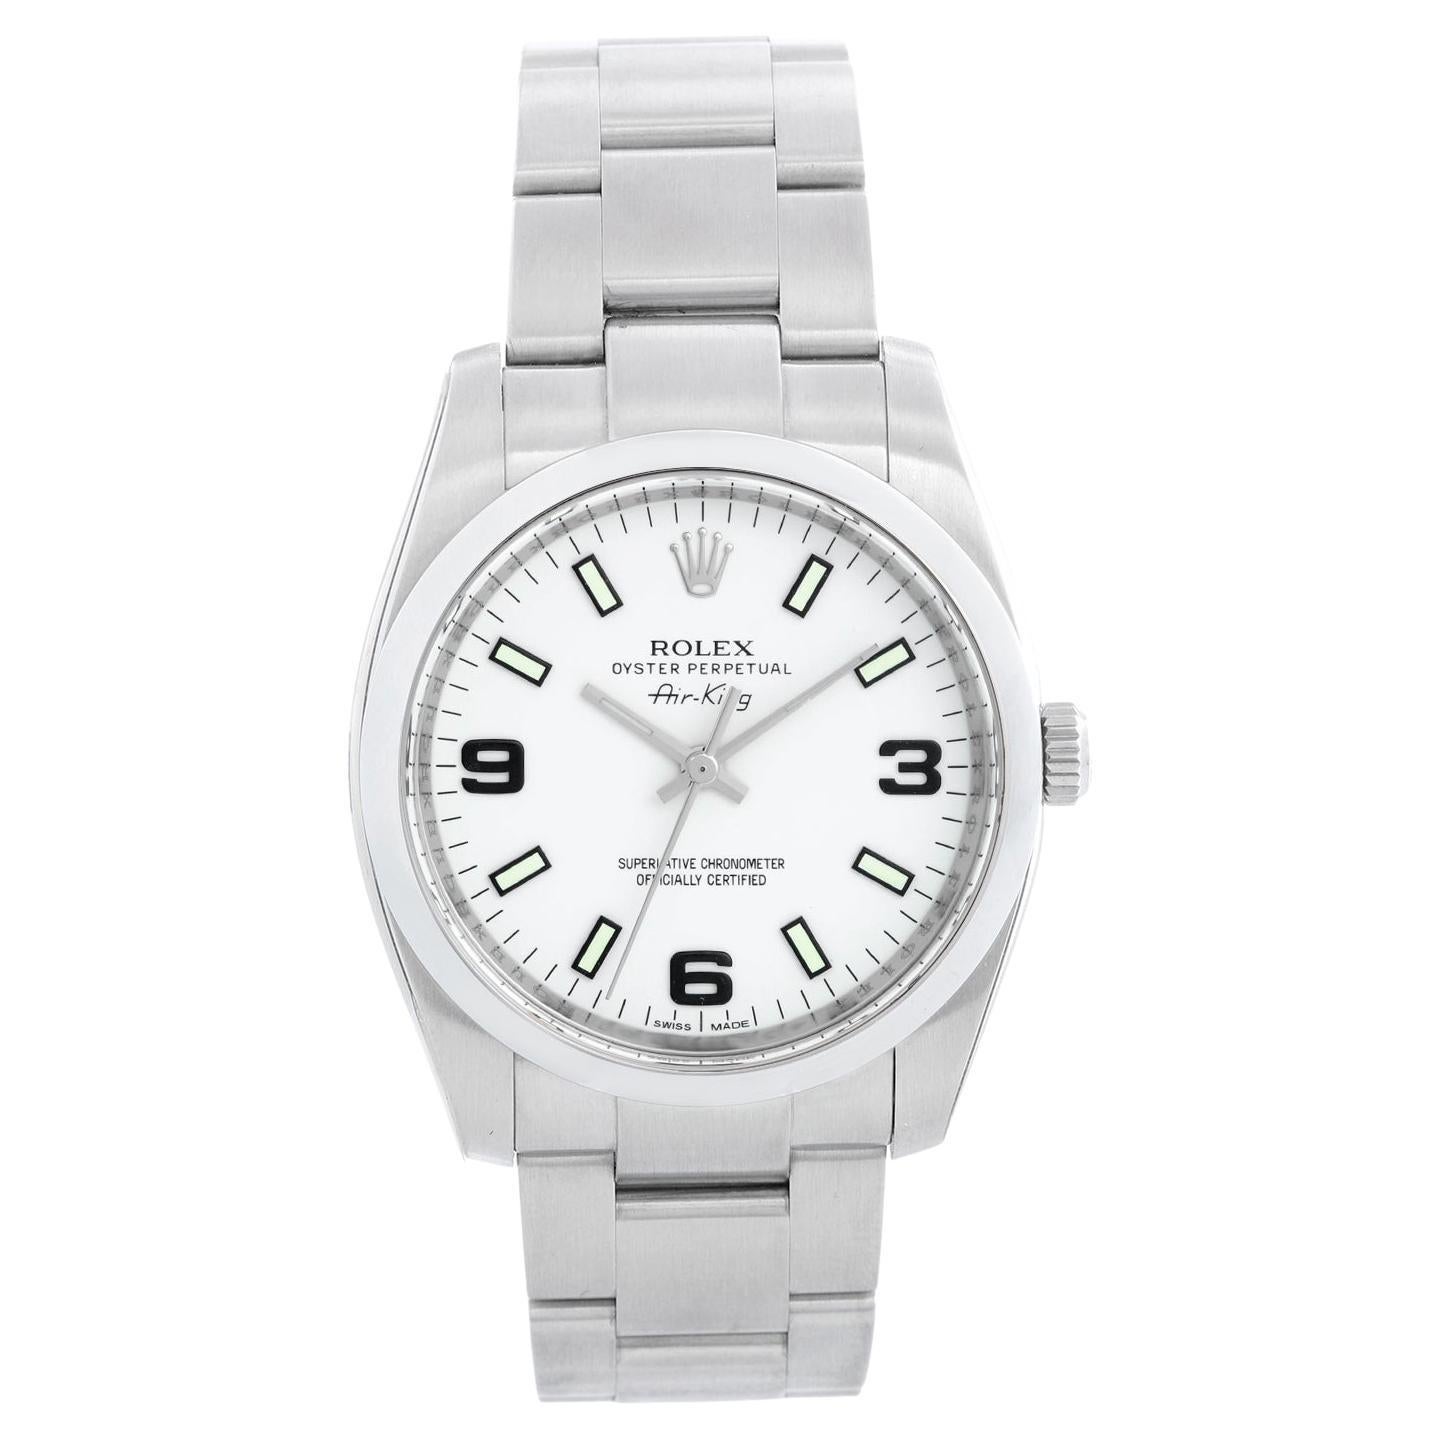 Rolex Air-King Men's Stainless Steel Watch White Dial 114200